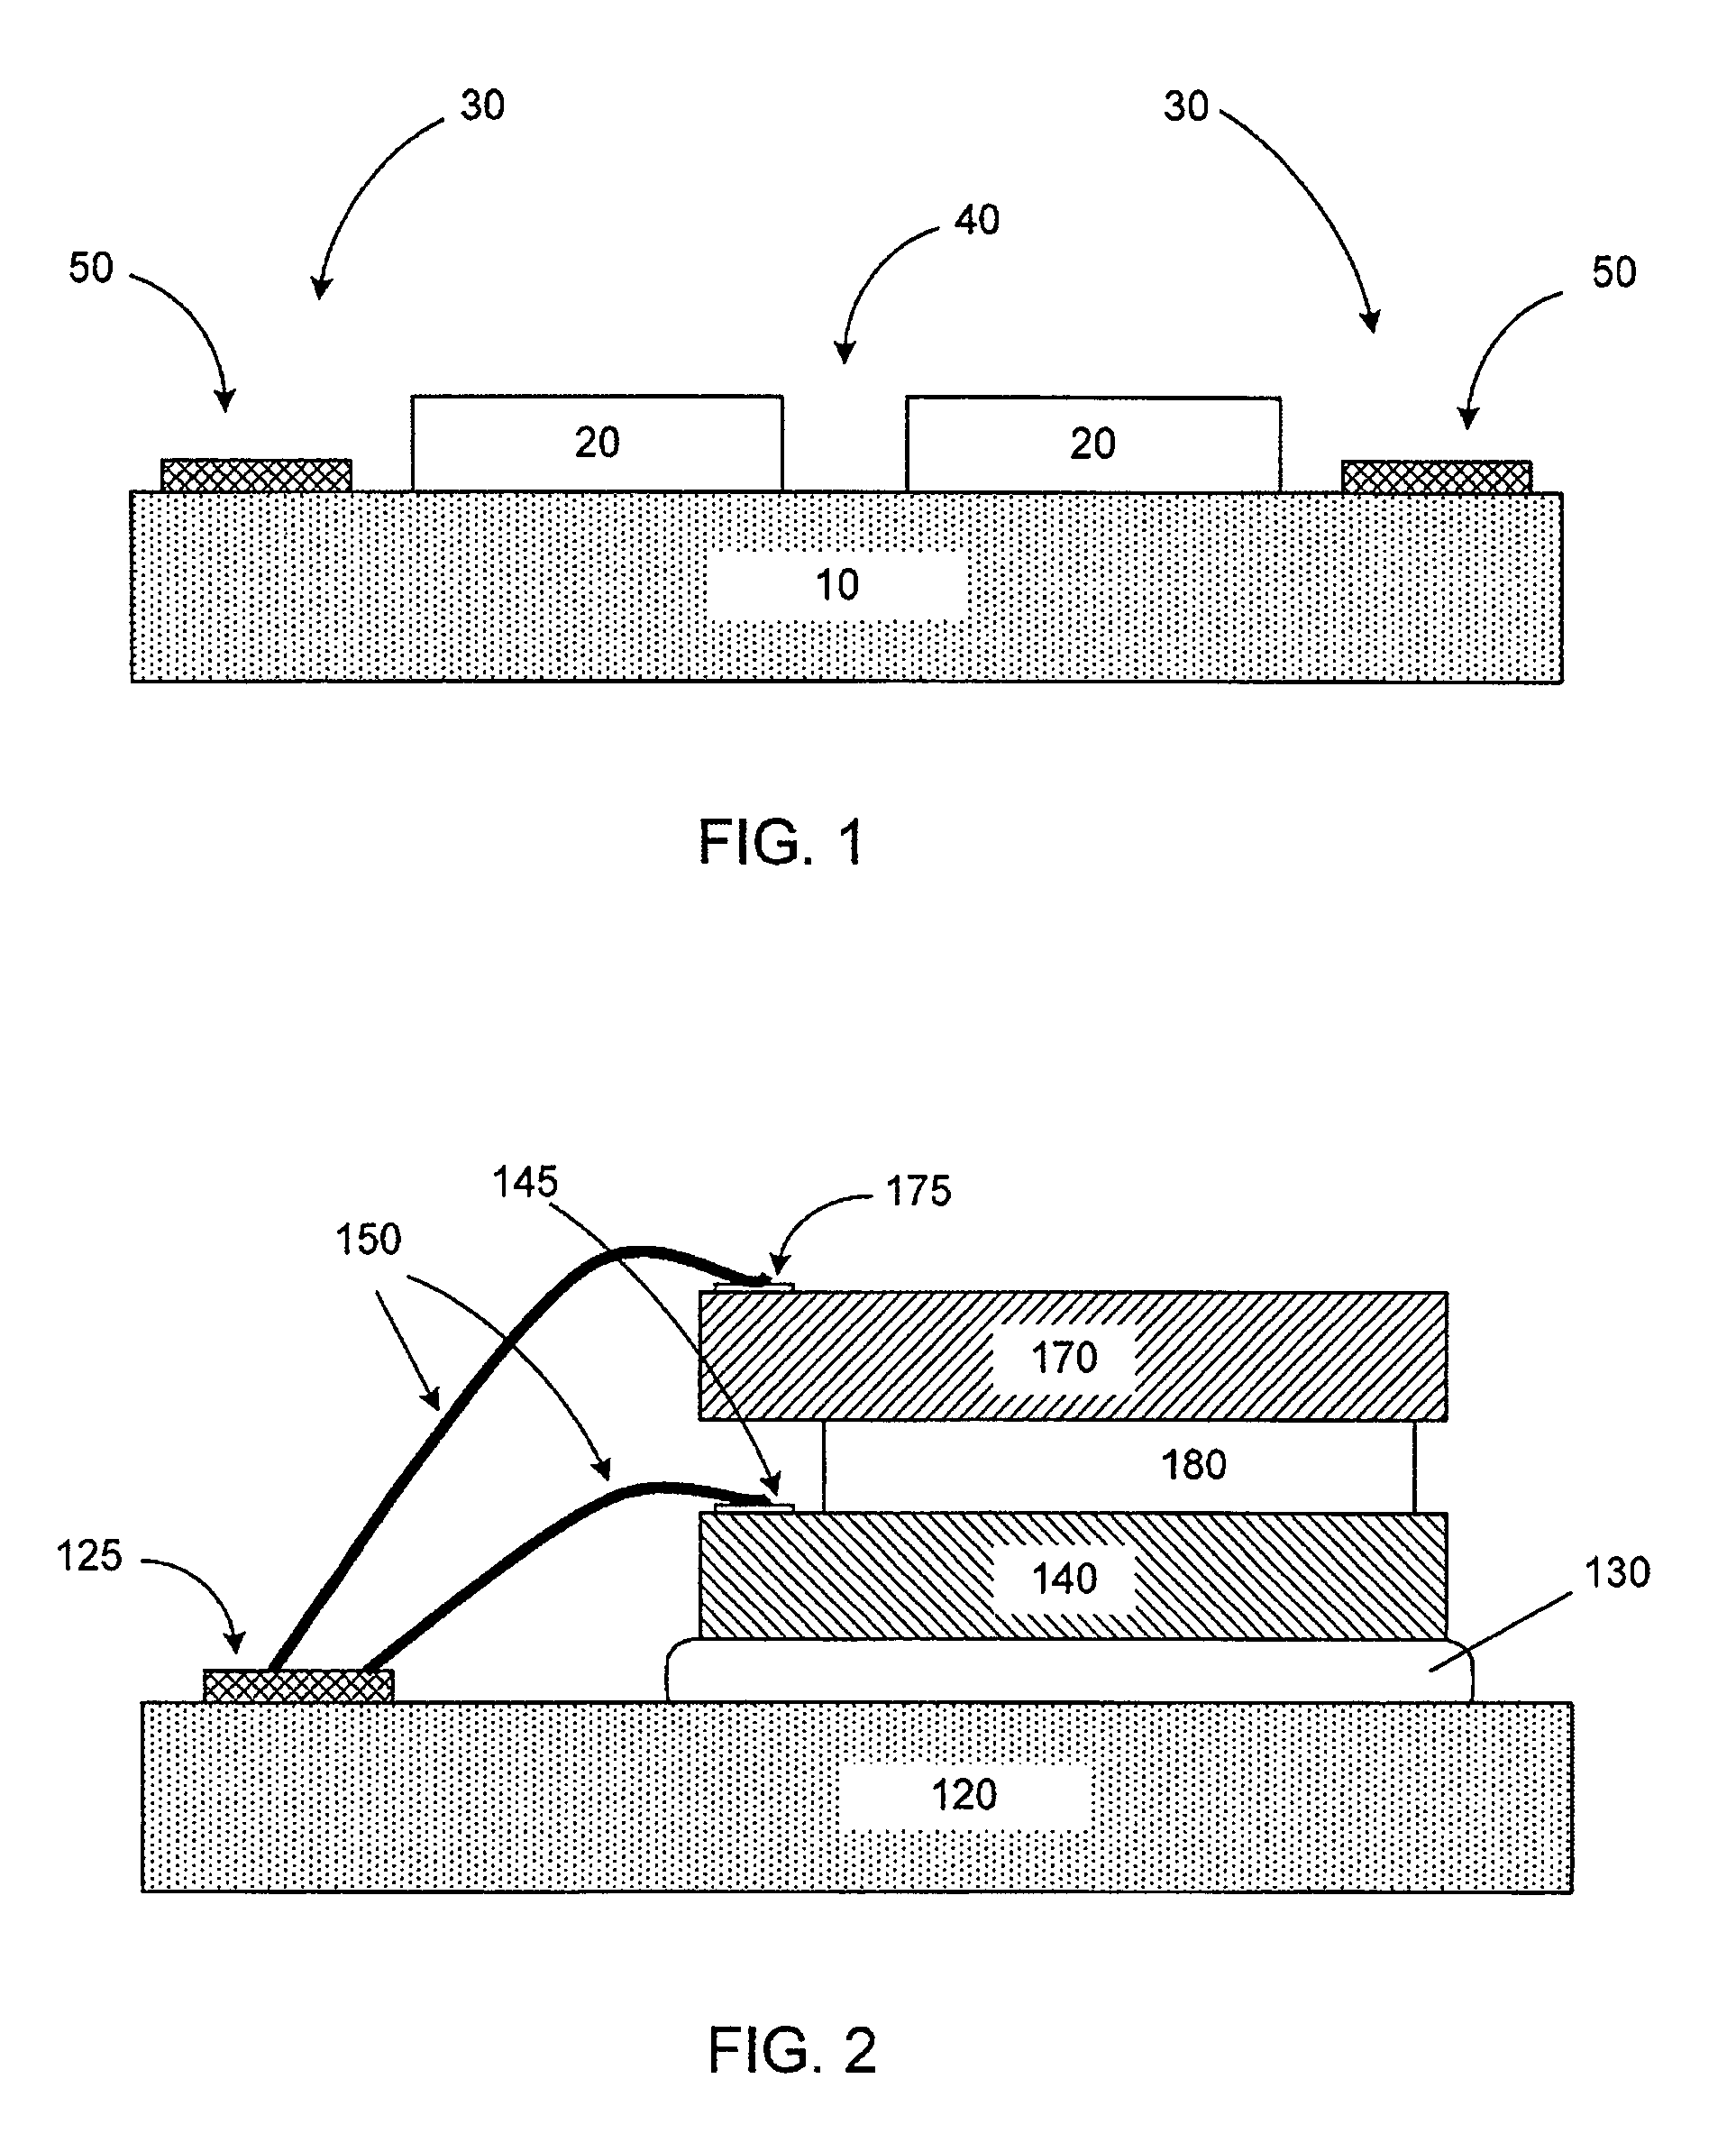 Methods and materials useful for chip stacking, chip and wafer bonding